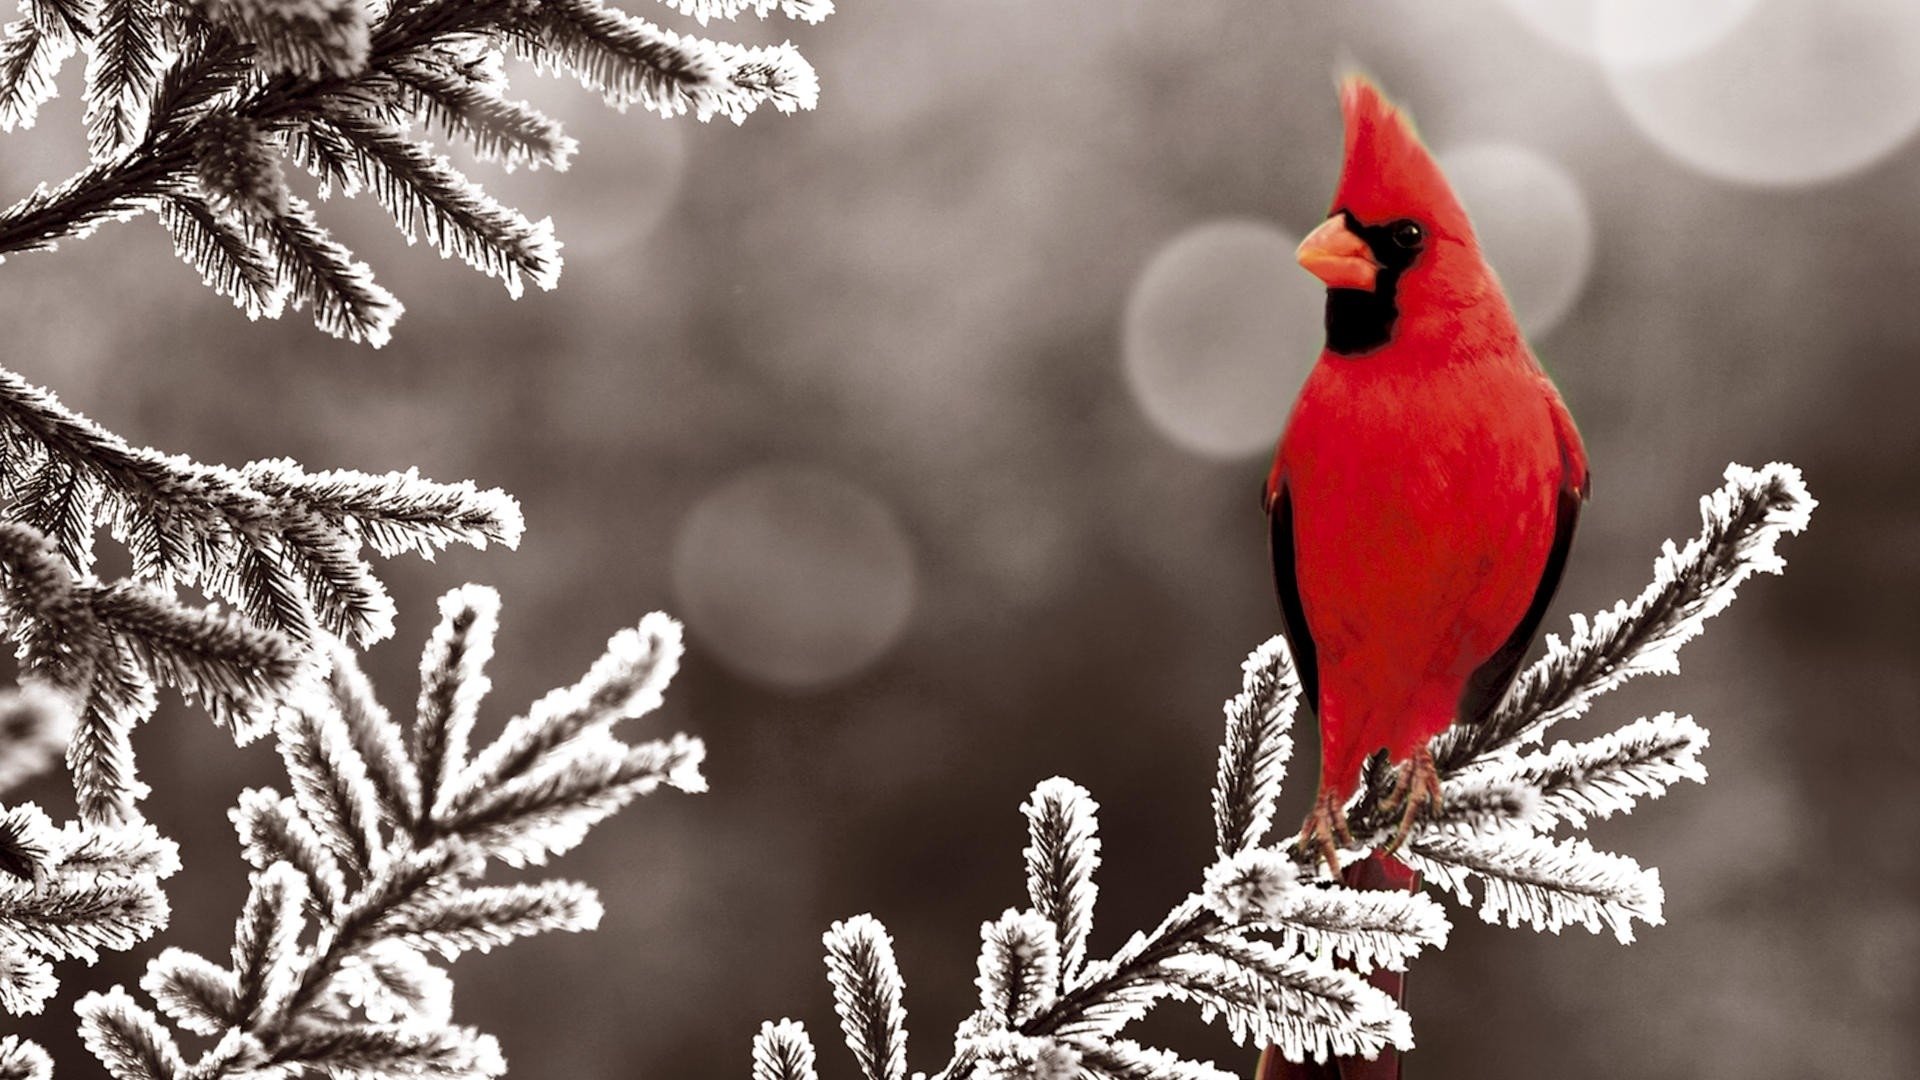 Download Wallpapers Download 1920x1080 ice winter red birds cardinal 1920x1080